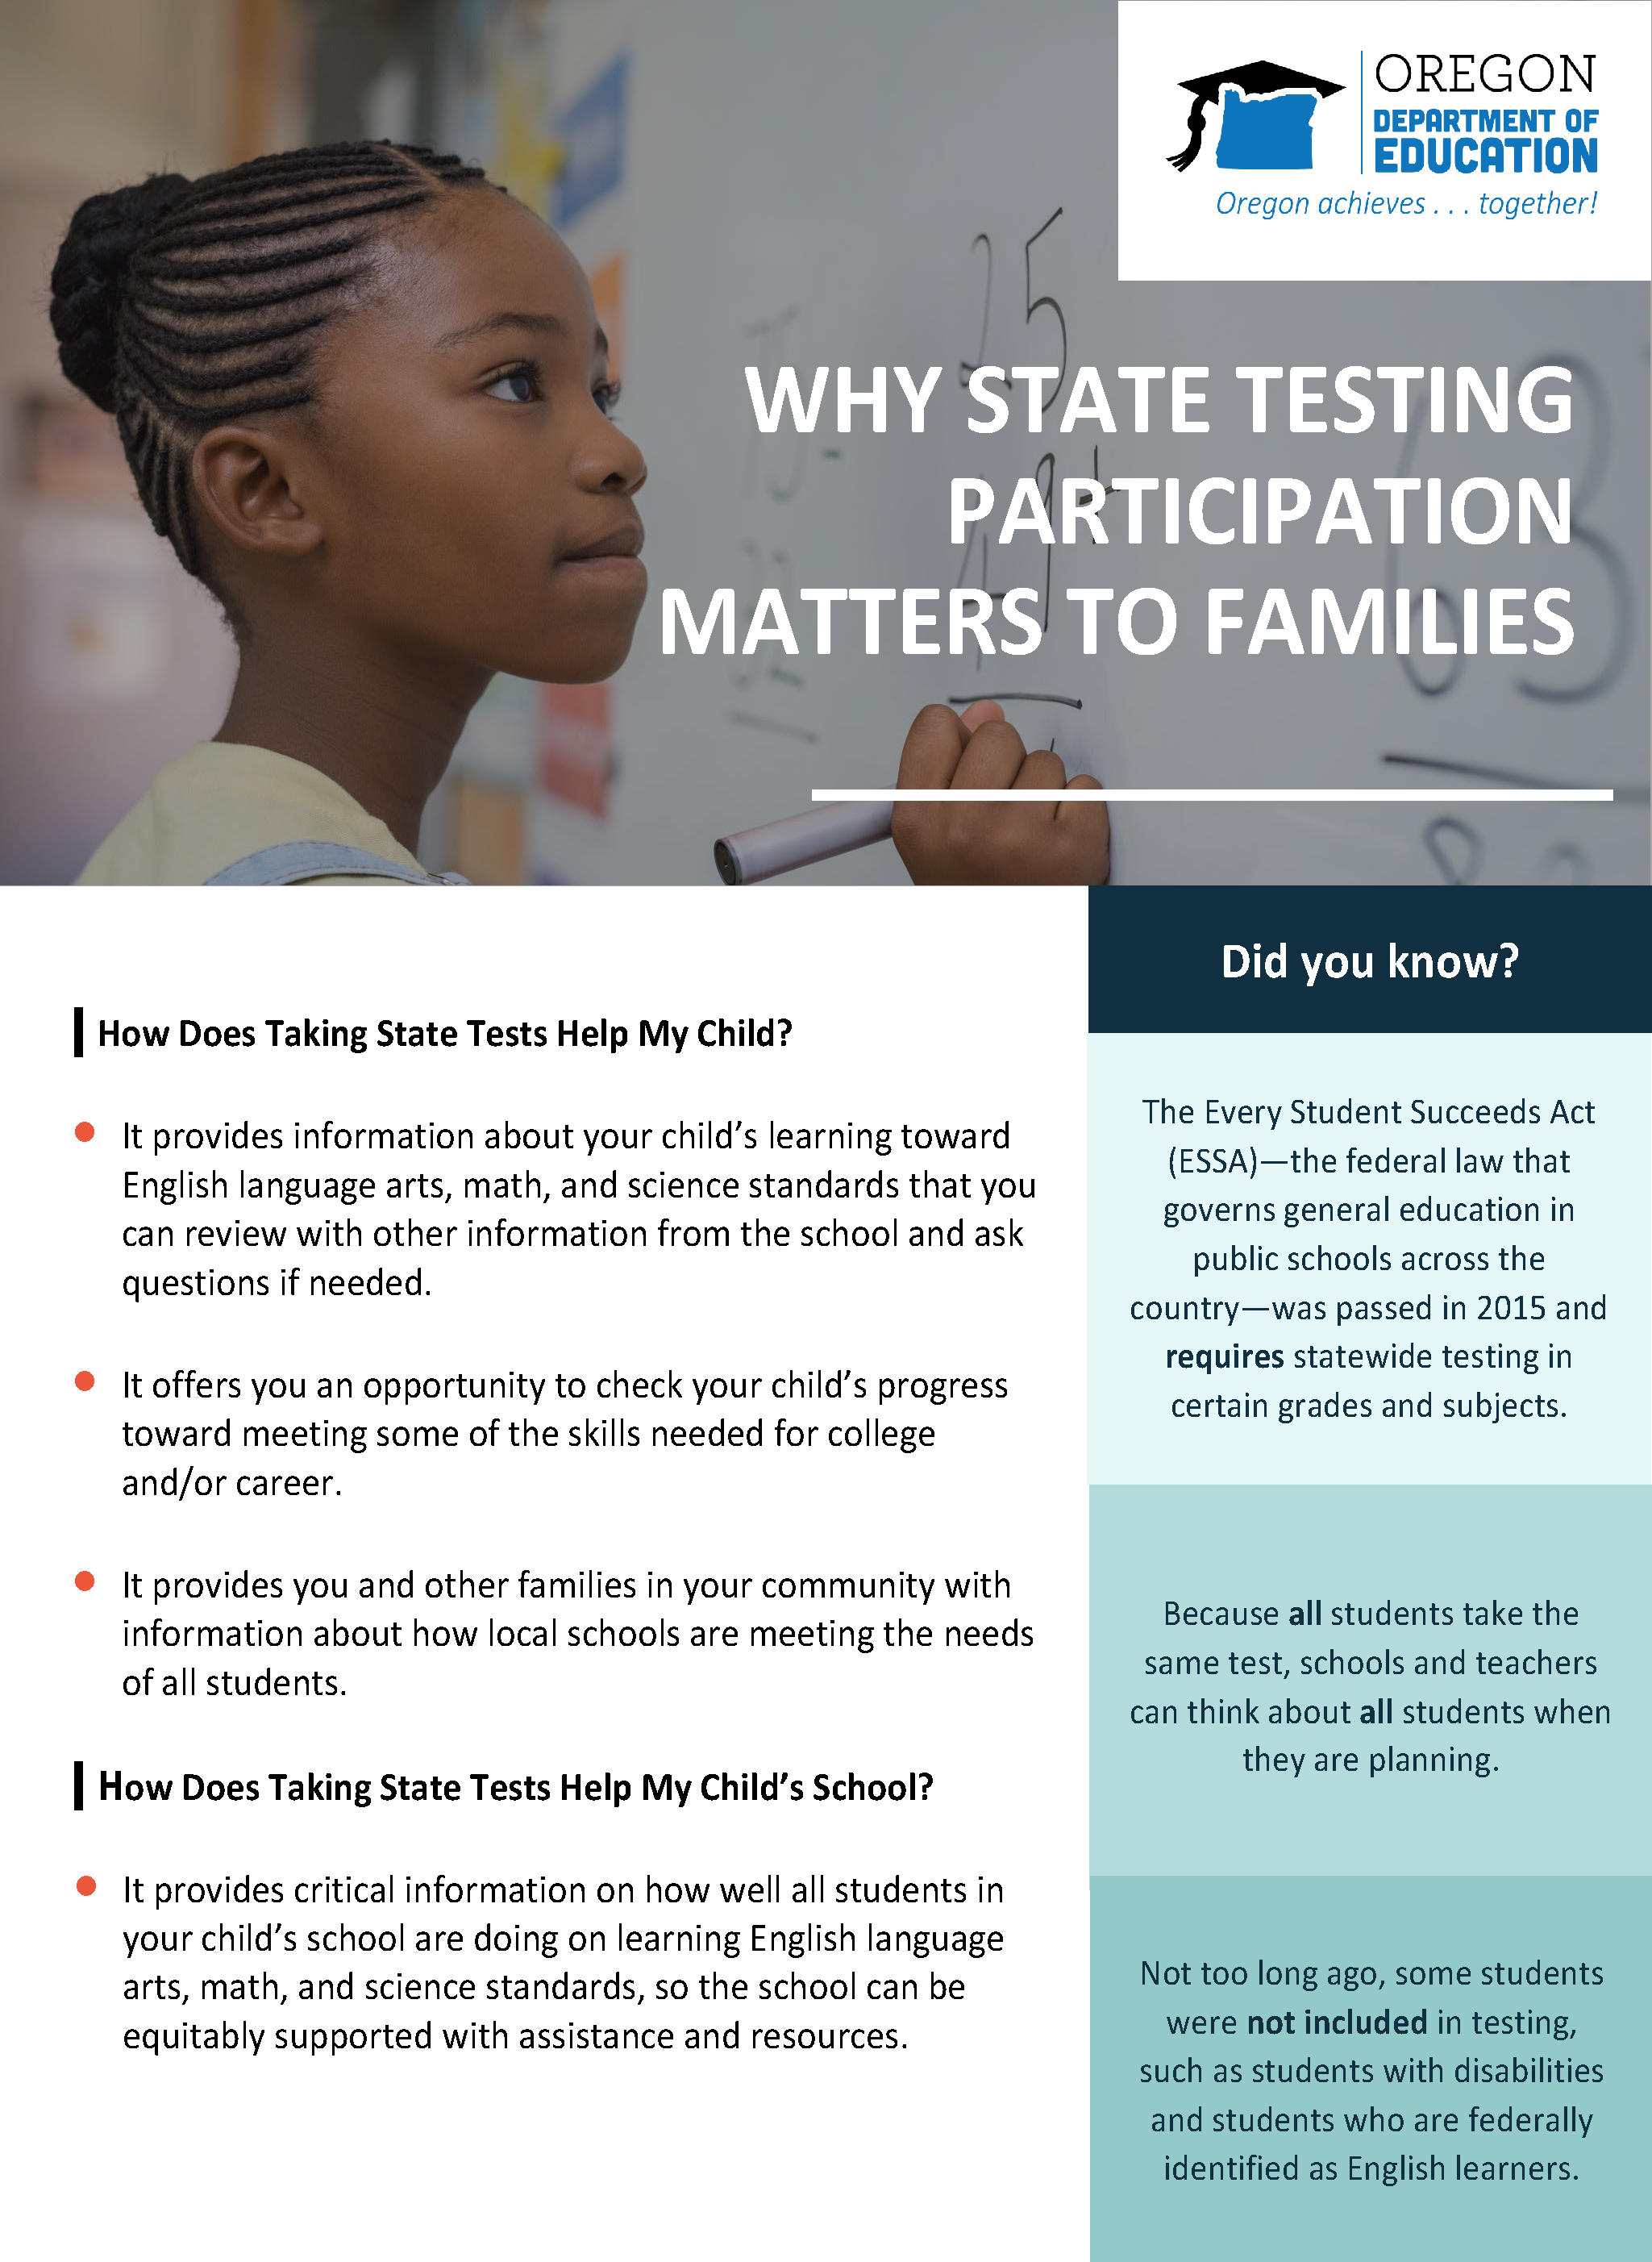 WHY STATE TESTING PARTICIPATION MATTERS TO FAMILIES How Does Taking State Tests Help My Child? • It provides information about your child’s learning toward English language arts, math, and science standards that you can review with other information from the school and ask questions if needed. • It offers you an opportunity to check your child’s progress toward meeting some of the skills needed for college and/or career. • It provides you and other families in your community with information about how local schools are meeting the needs of all students. How Does Taking State Tests Help My Child’s School? • It provides critical information on how well all students in your child’s school are doing on learning English language arts, math, and science standards, so the school can be equitably supported with assistance and resources. The Every Student Succeeds Act (ESSA)—the federal law that governs general education in public schools across the country—was passed in 2015 and requires statewide testing in certain grades and subjects. Did you know? Because all students take the same test, schools and teachers can think about all students when they are planning. Not too long ago, some students were not included in testing, such as students with disabilities and students who are federally identified as English learners. National Center on Educational Outcomes www.nceo.info NCEO is supported through a cooperative agreement (H326G160001) between the University of Minnesota, National Center on Educational Outcomes (NCEO) (#H326G160001) and the U.S. Department of Education, Office of Special Education and Rehabilitative Services (OSERS), Office of Special Education Programs. The materials do not necessarily reflect the position or policy of the U.S. Department of Education or Offices within it. Project Officer: David Egnor • It helps identify system strengths and areas where growth is needed across time to evaluate curriculum, instruction, and other assessment practices. How Should My Child’s Test Results Be Used? • Remember that the quality of a school is more than the sum of its test results. Avoid judgments or decisions based solely on state test results. • Make state test results part of conversations about your child’s learning. Look for alignment with other information about your child’s learning from their teacher and school. Ask questions if the information is not consistent. • Decisions about opportunities for your child–such as challenging math pathways, Advanced Placement, International Baccalaureate, or Talented and Gifted programs–should be based on multiple sources of evidence, not state test results alone. CONTACT ODE’s Assessment Team Webpage Please send any questions, comments, or recommendations to: ODE.AssessmentTeam@ode.oregon.gov ODE Assessment Resources The Right Assessment for the Right Purpose Parent Assessment Literacy Training Modules Results of state tests help identify trends in learning. This is especially important if groups of students, such as students with disabilities and students federally identified as English learners, are being underserved. State testing gives a snapshot of how a whole school system is performing in key areas. This helps with decisions that will improve instruction and provide targeted resources and support to different schools. Student test data helps improve our understanding of how well we are teaching and supporting our students.